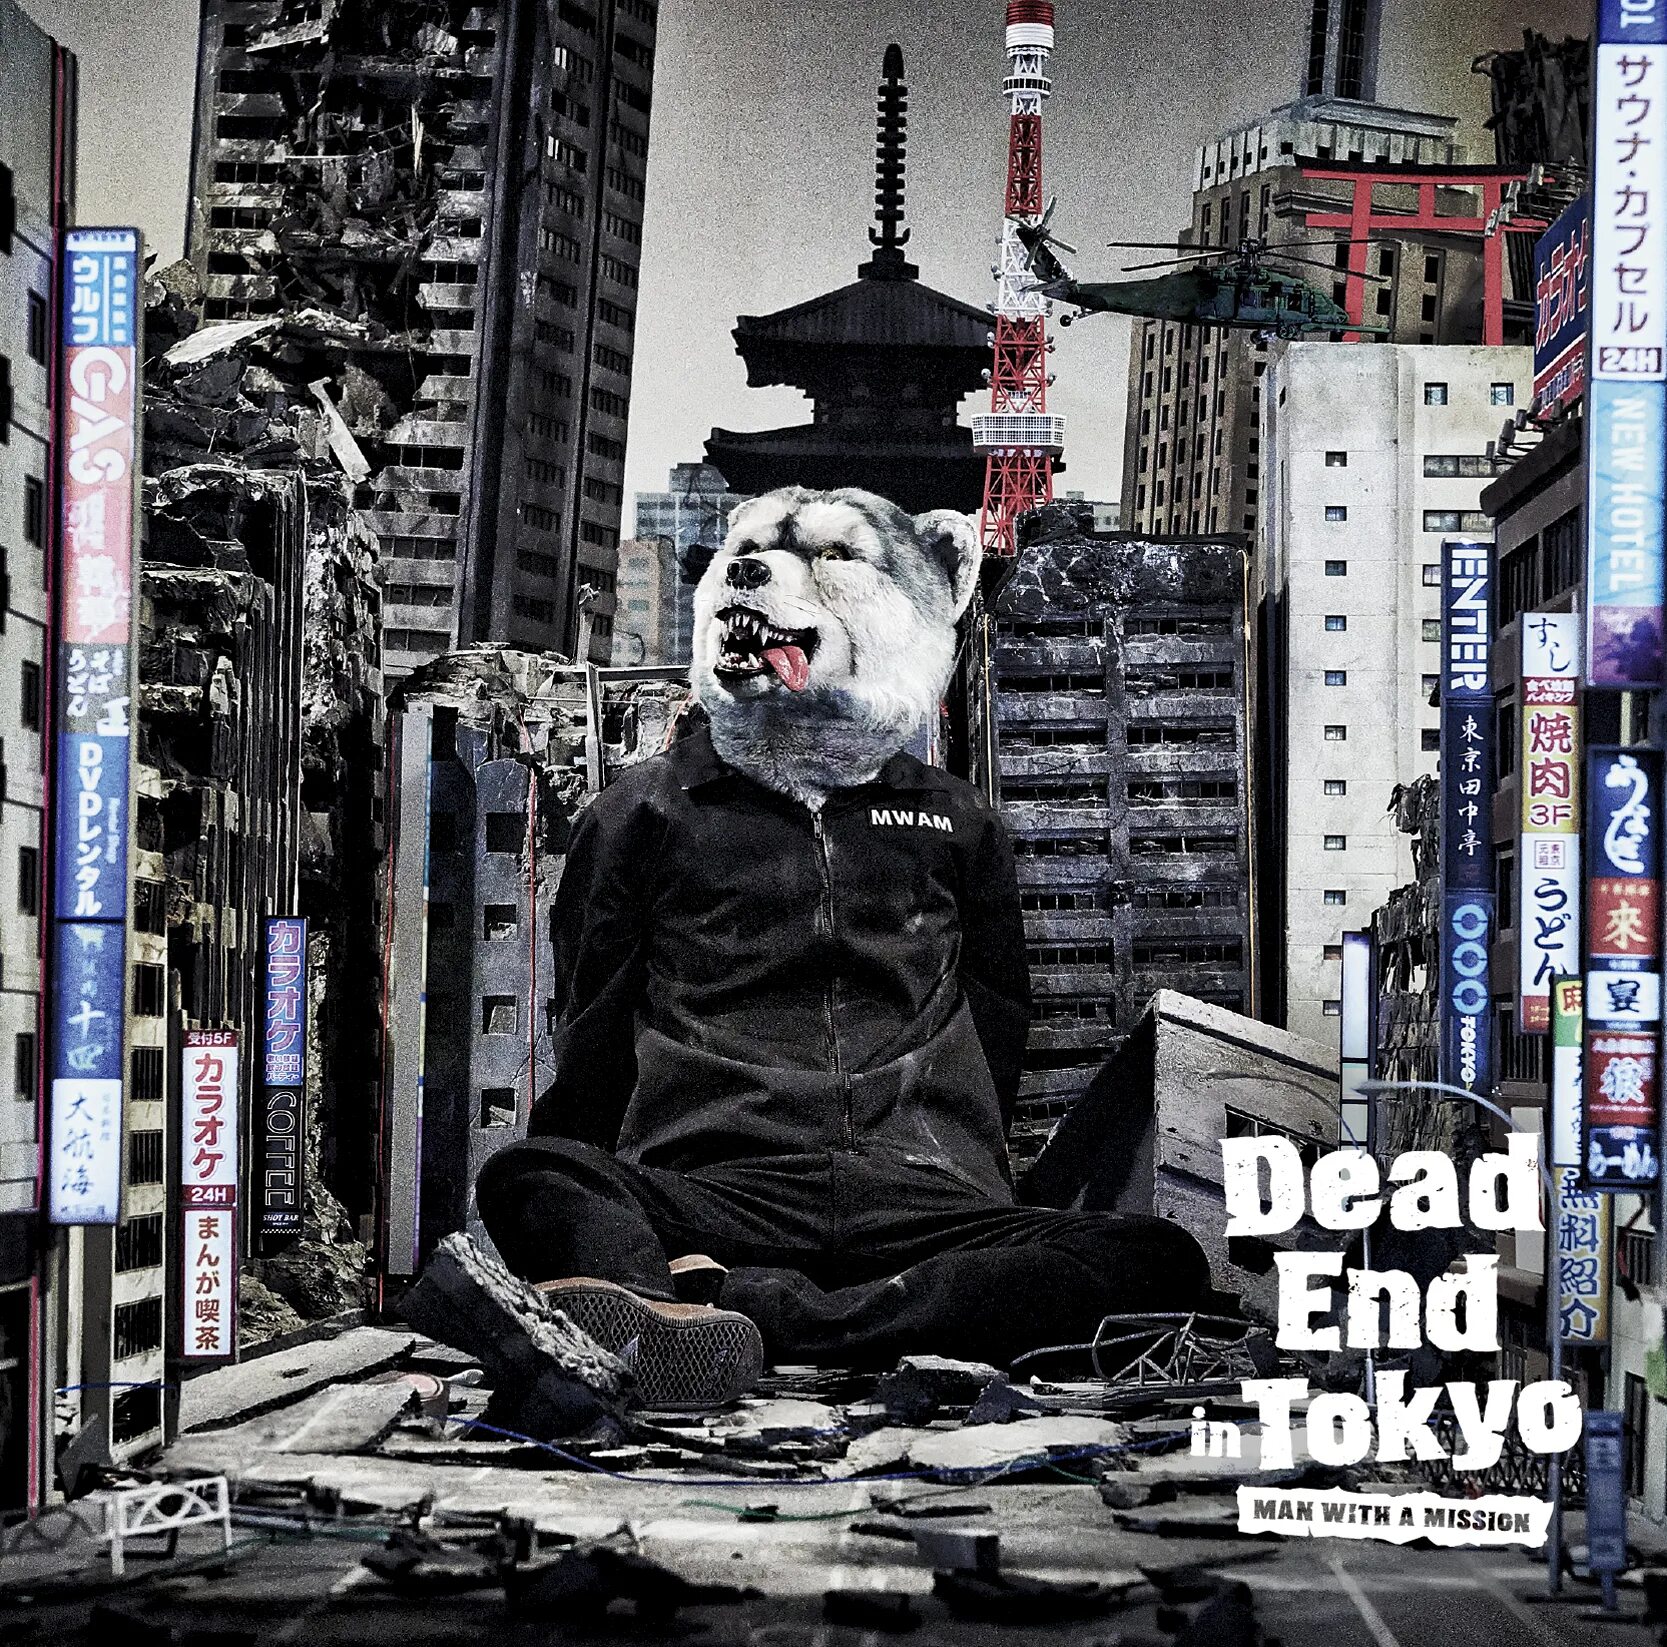 Dead end in Tokyo. Man with a Mission - Dead end in Tokyo. Man with a Mission. In the end песня.